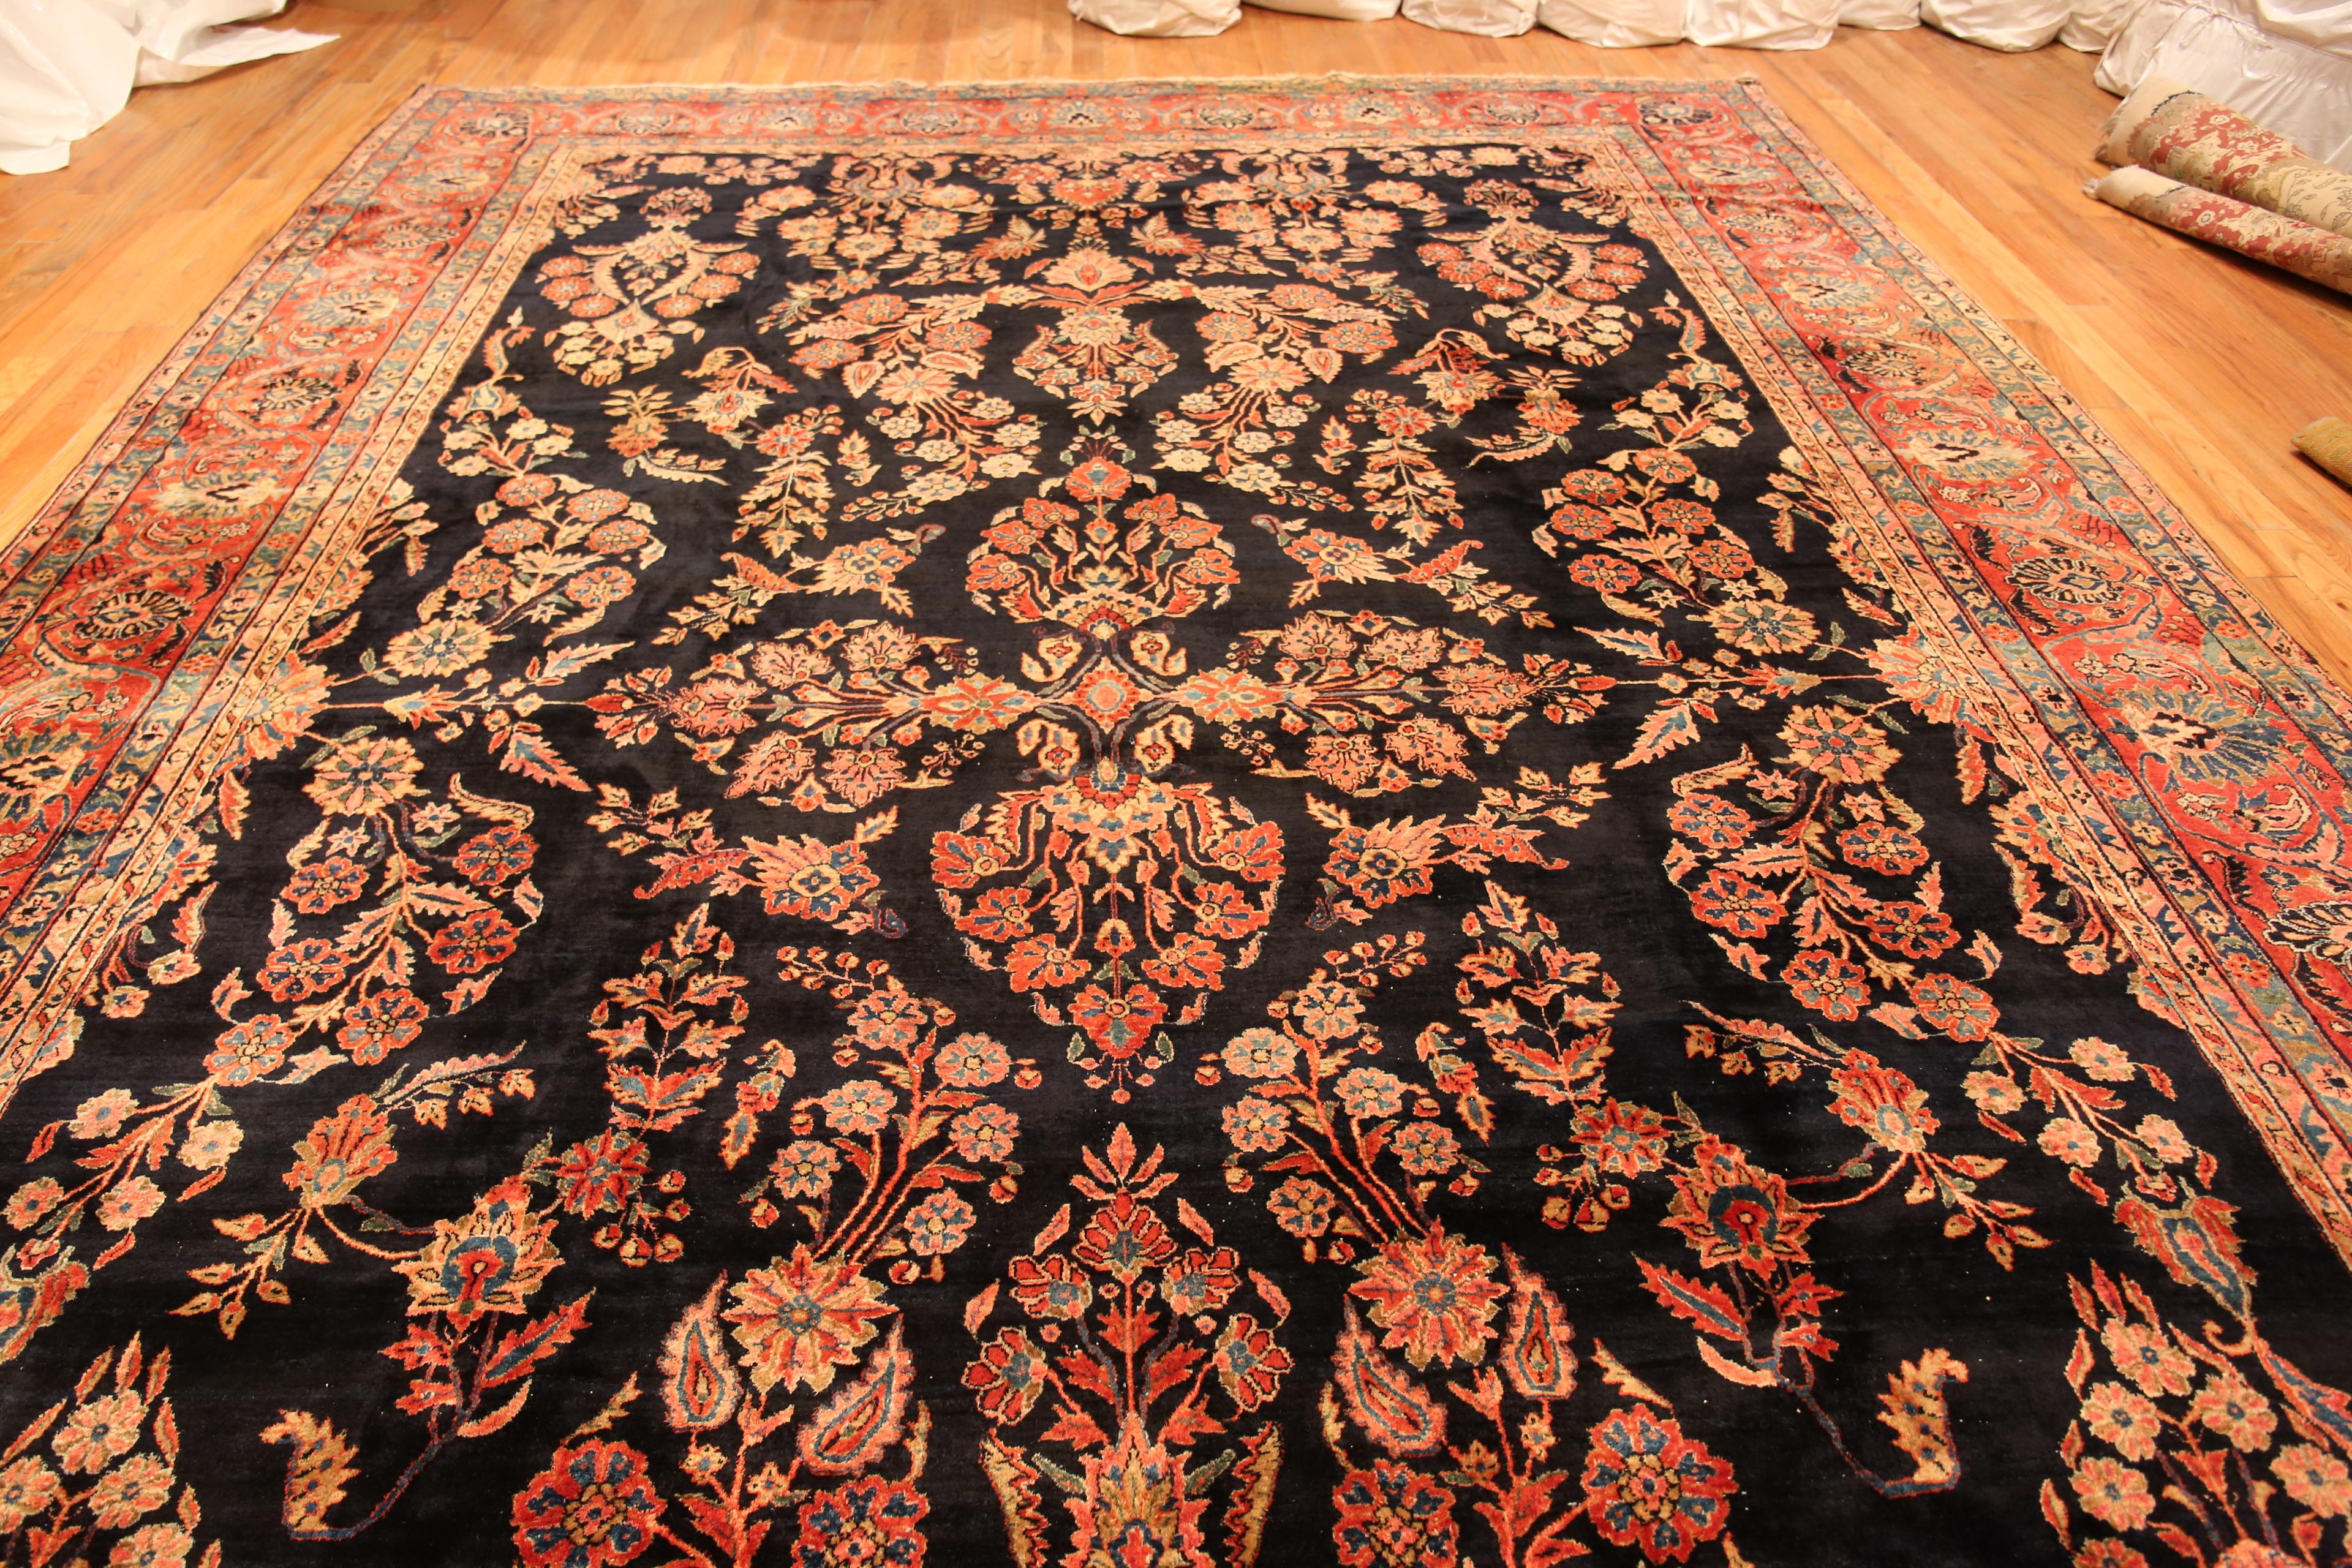 Bold Beautiful Fine Large Size Floral Antique Rustic Persian Sarouk Rug, Country of origin: Persian rug, Circa date: 1920. Size: 11 ft 4 in x 17 ft 4 in (3.45 m x 5.28 m)